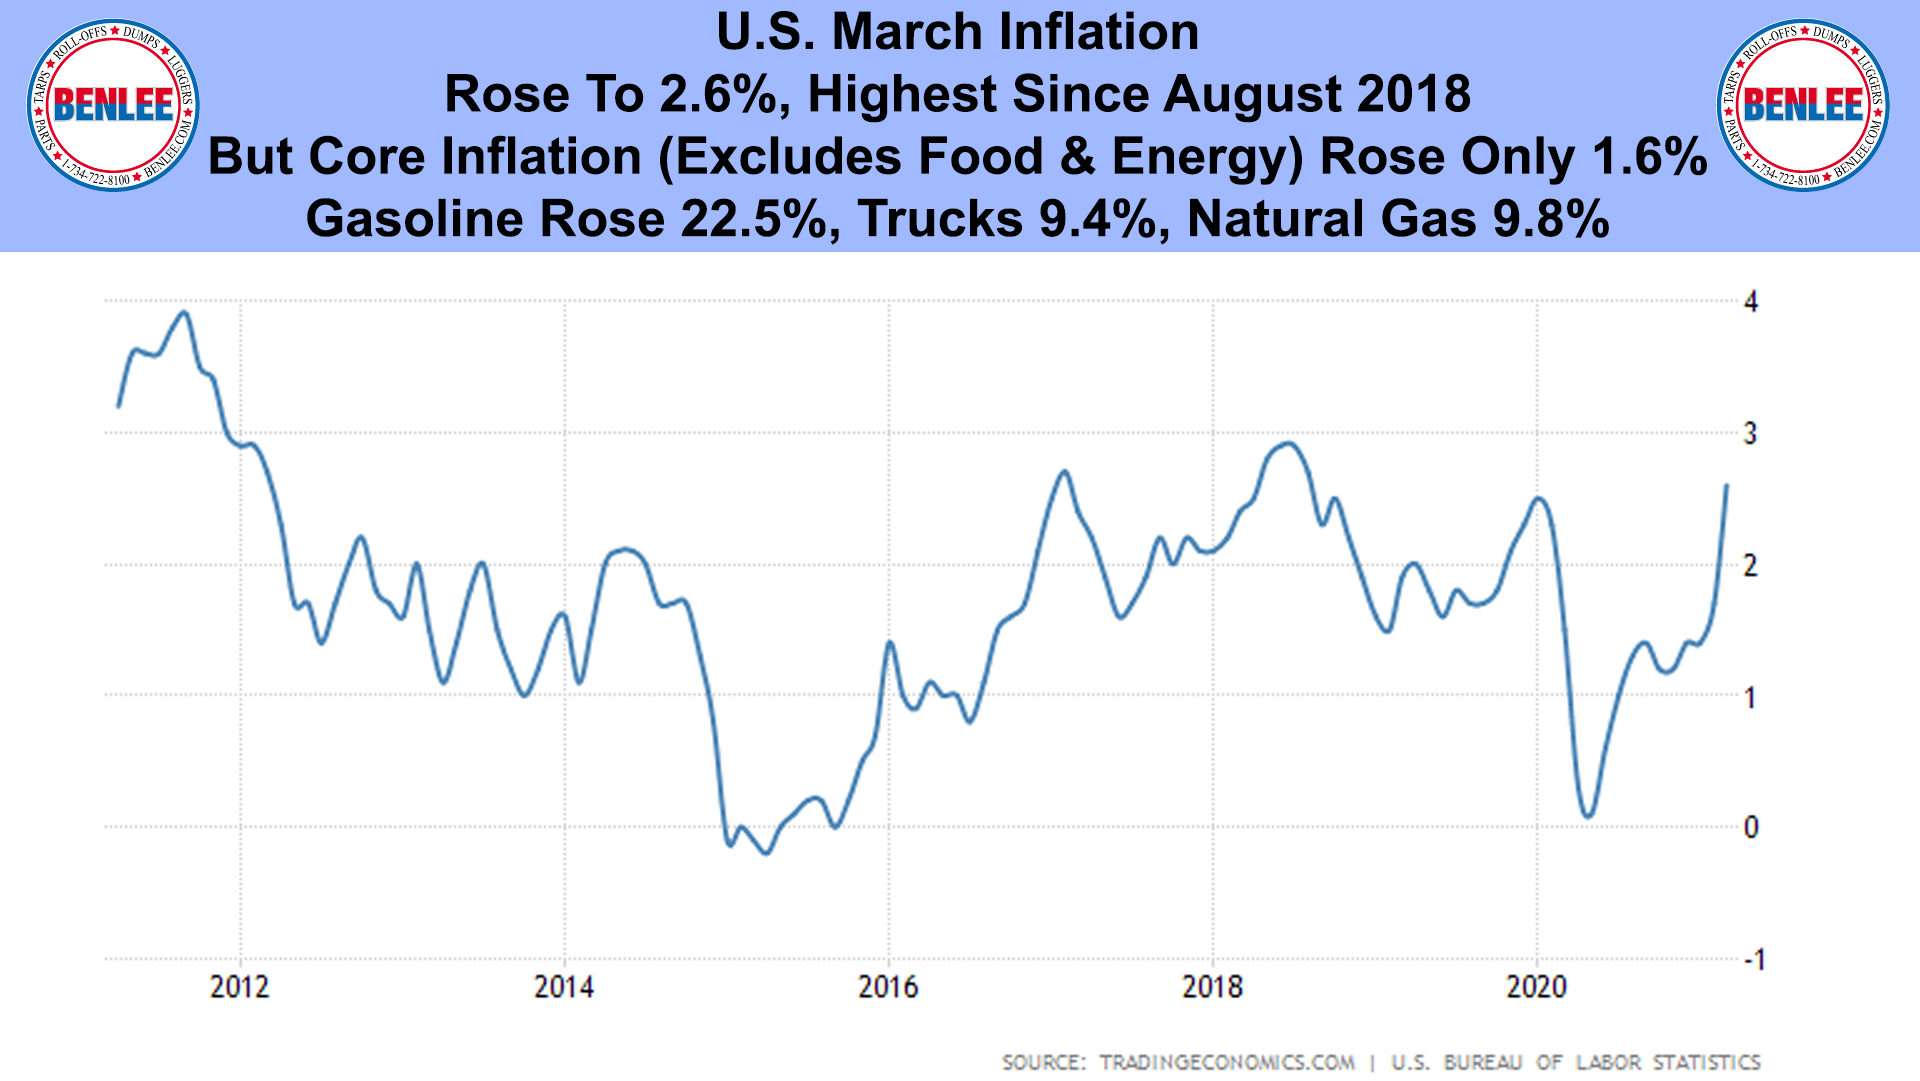 U.S. March Inflation